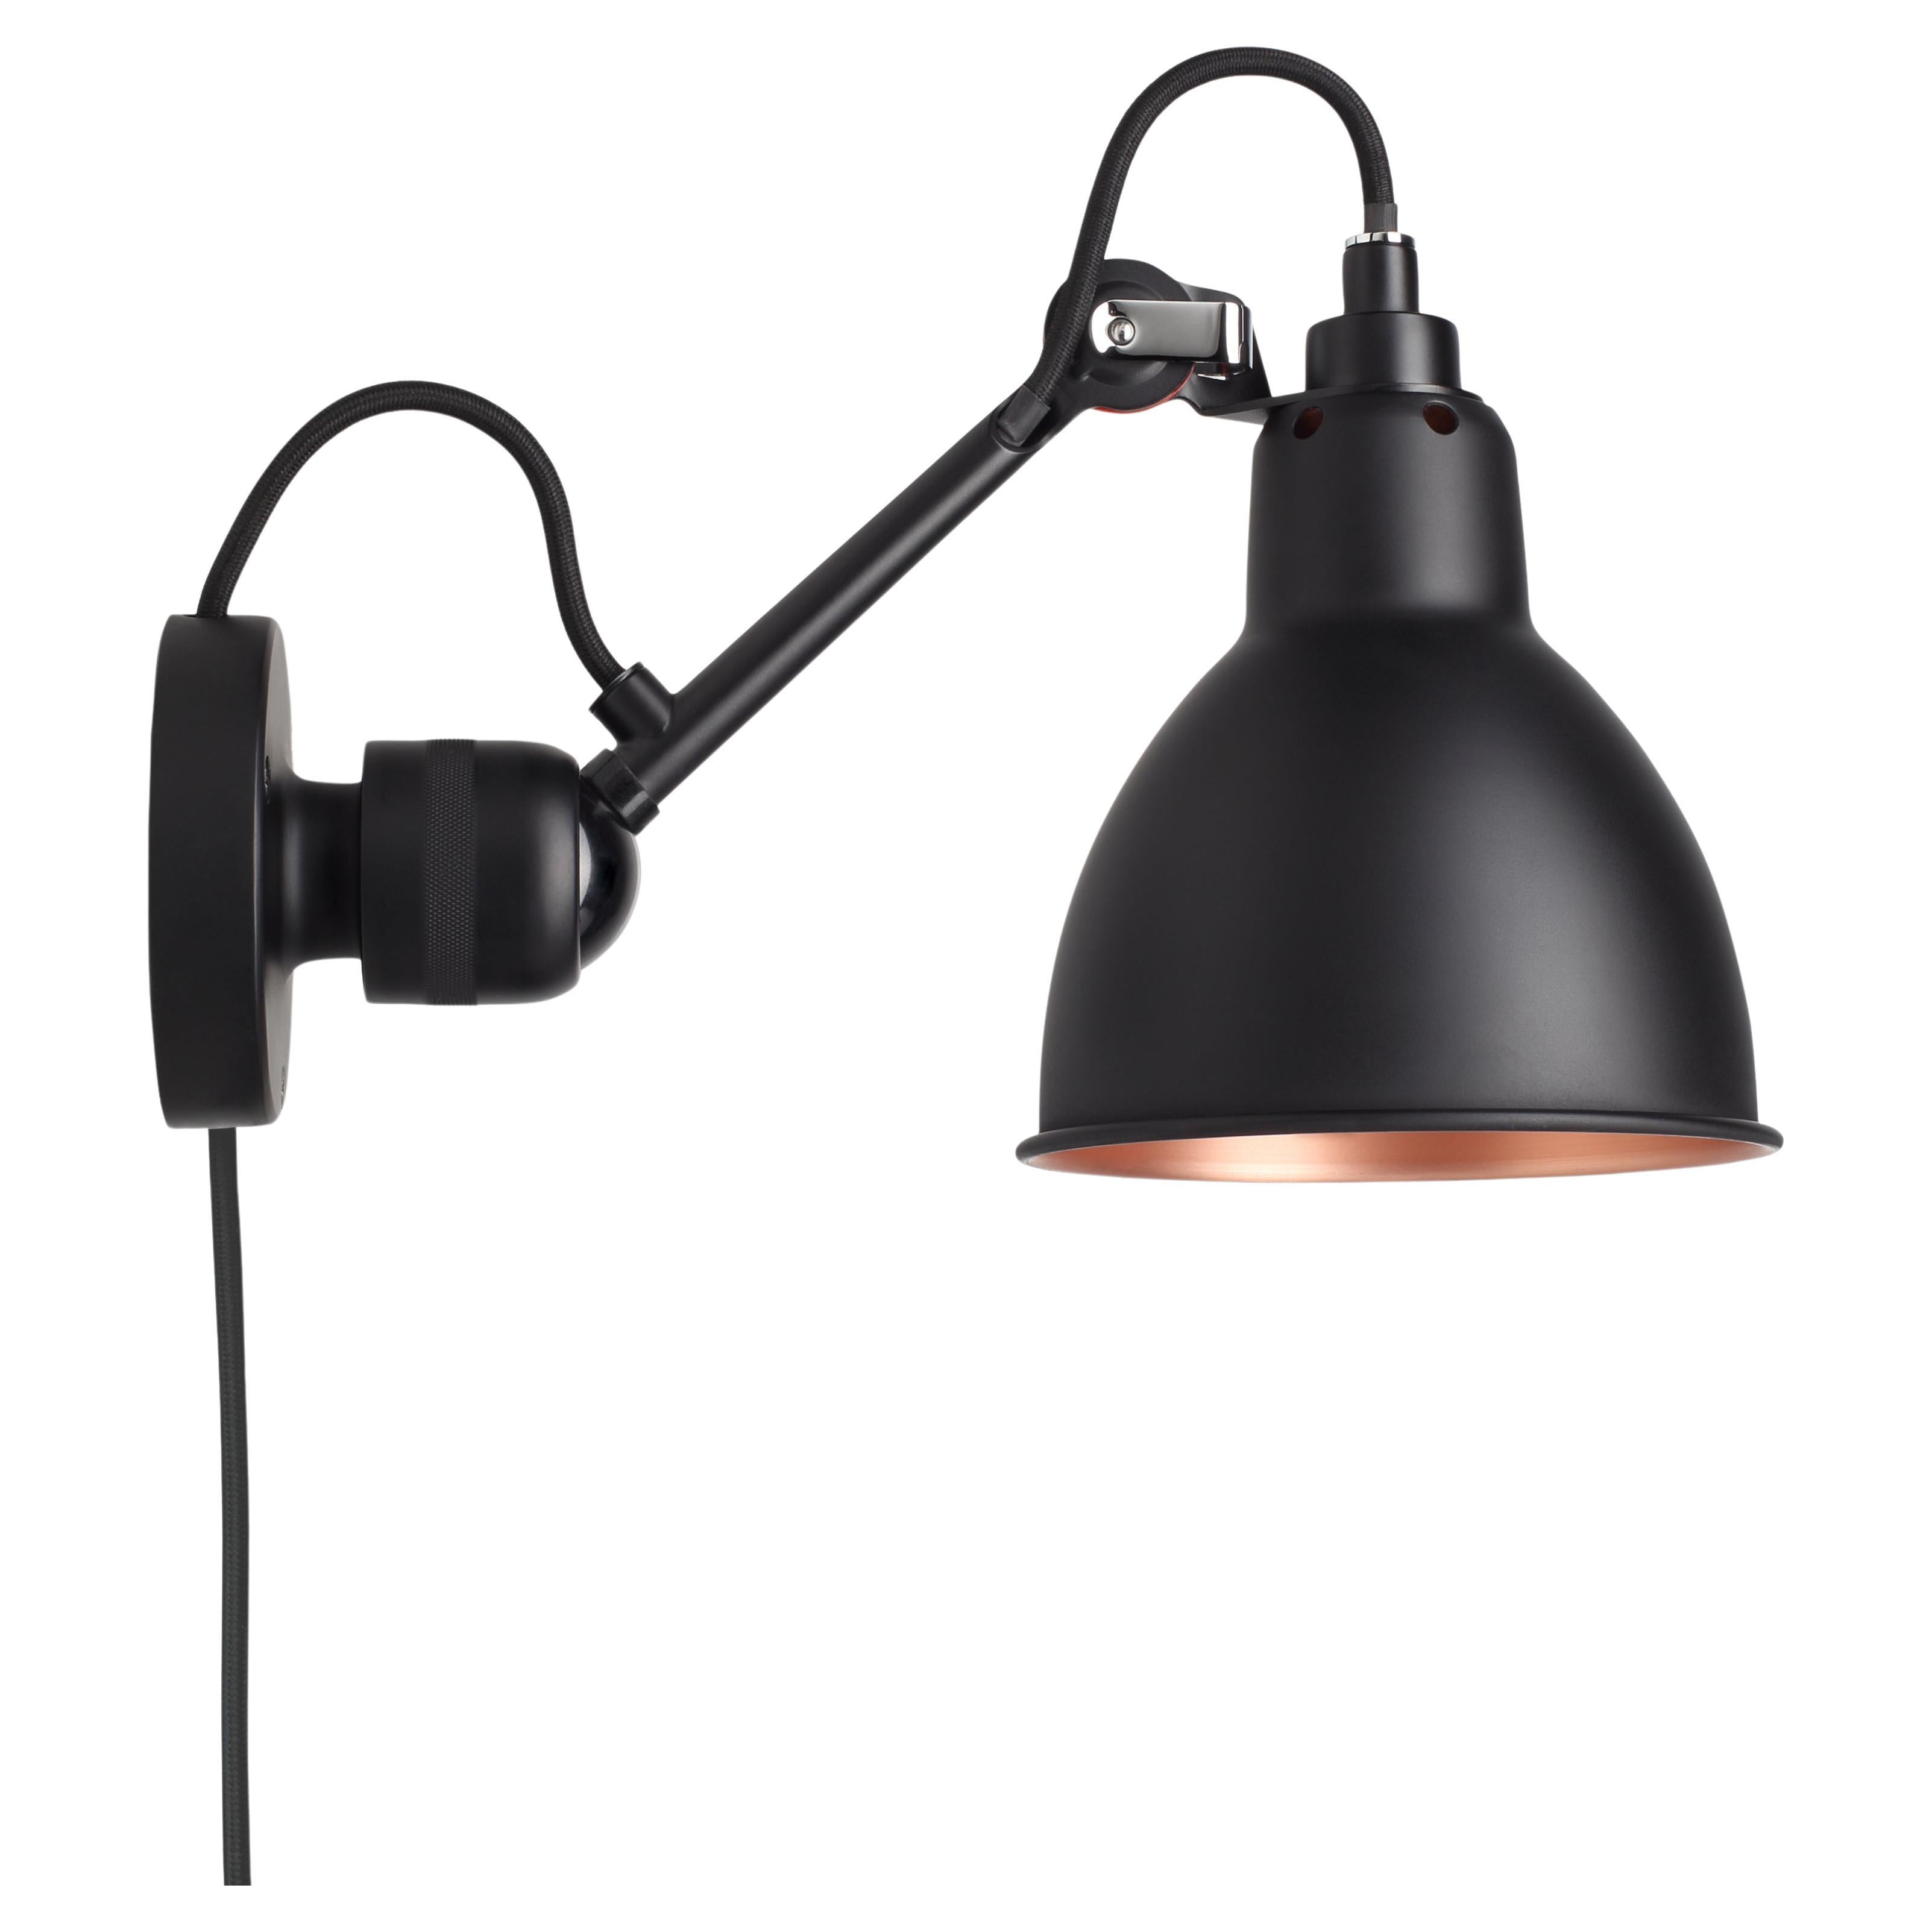 DCW Editions La Lampe Gras N°304 CA Wall Lamp in Black Arm & Black Copper Shade For Sale